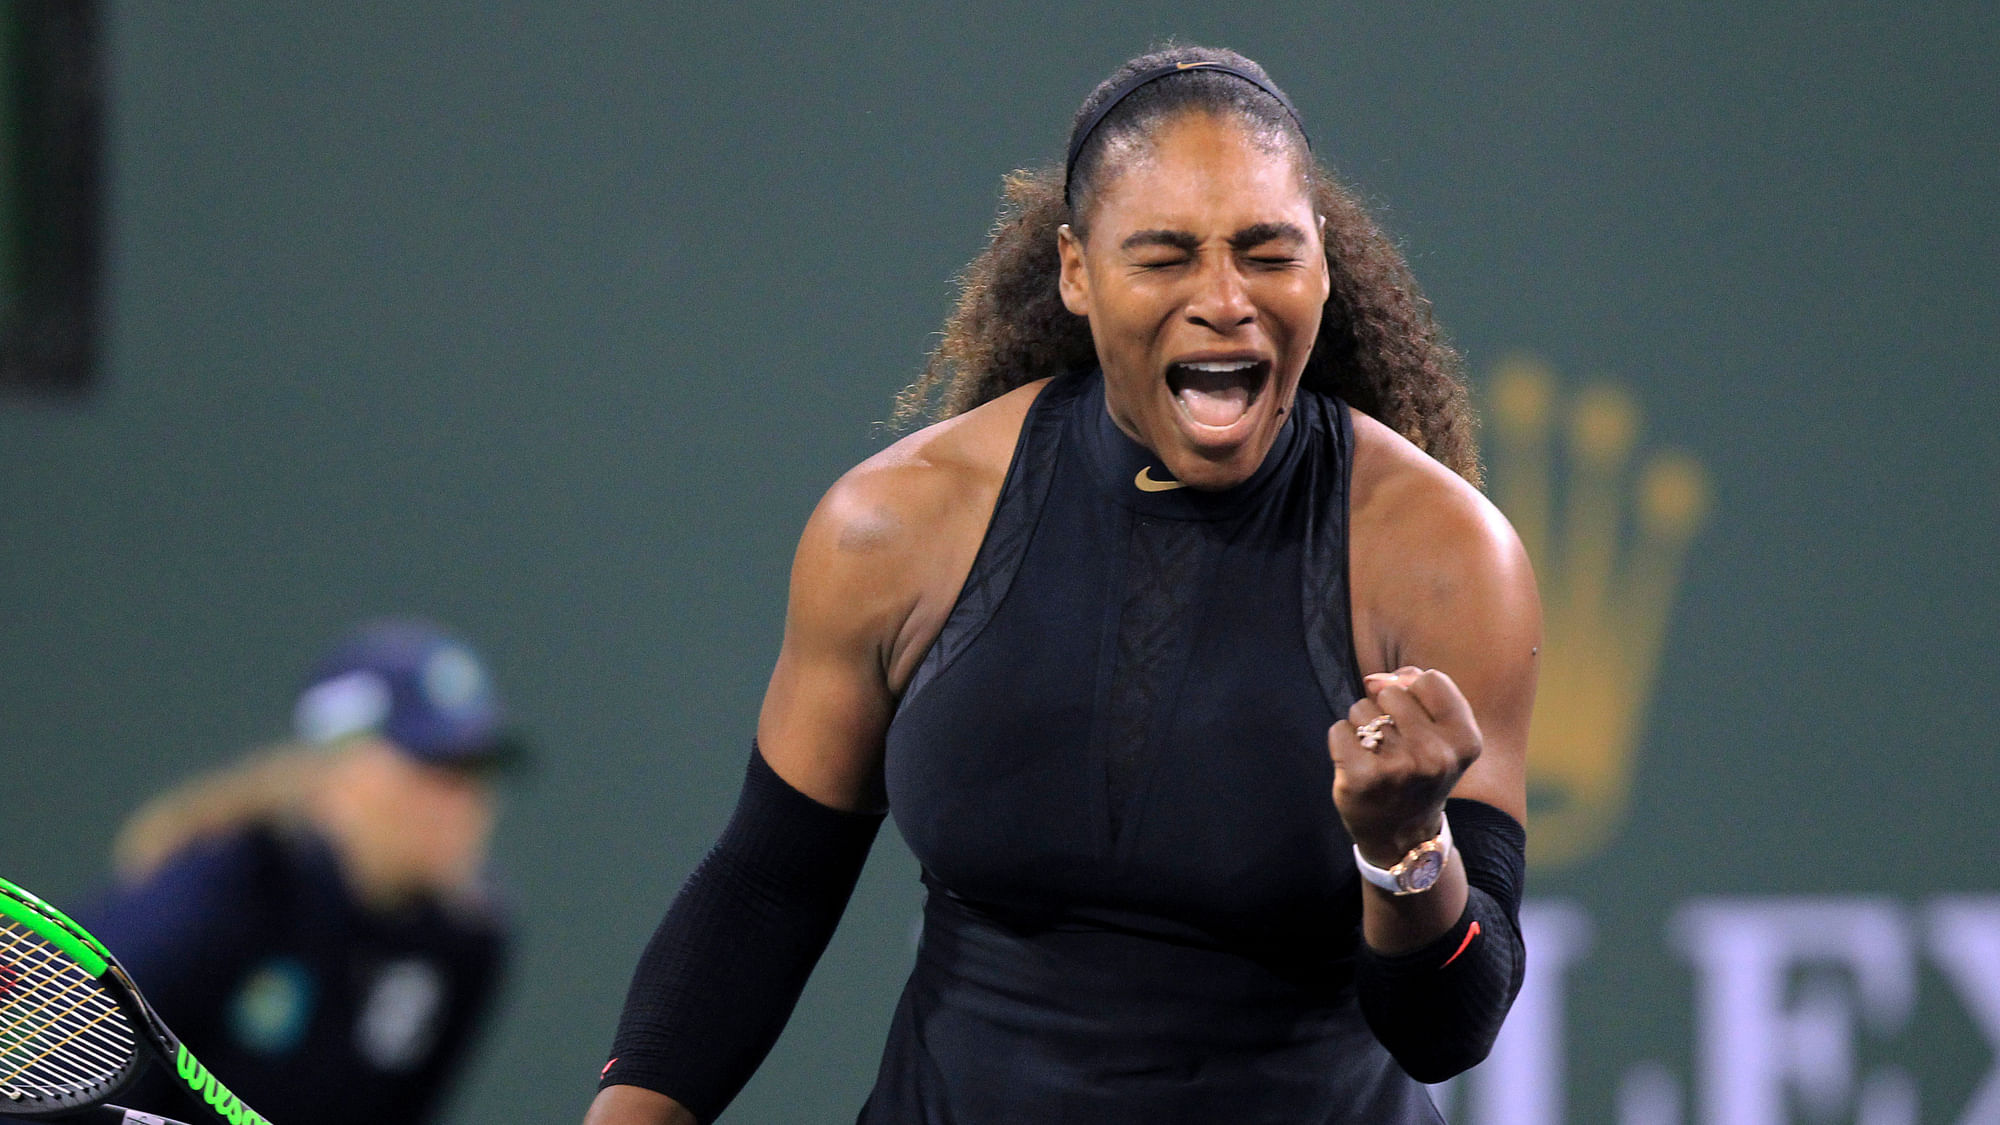 Serena Williams clenches her fist while playing Zarina Diyas during the first round of the BNP Paribas Open tennis tournament in Indian Wells, Calif., Thursday, March 8, 2018.